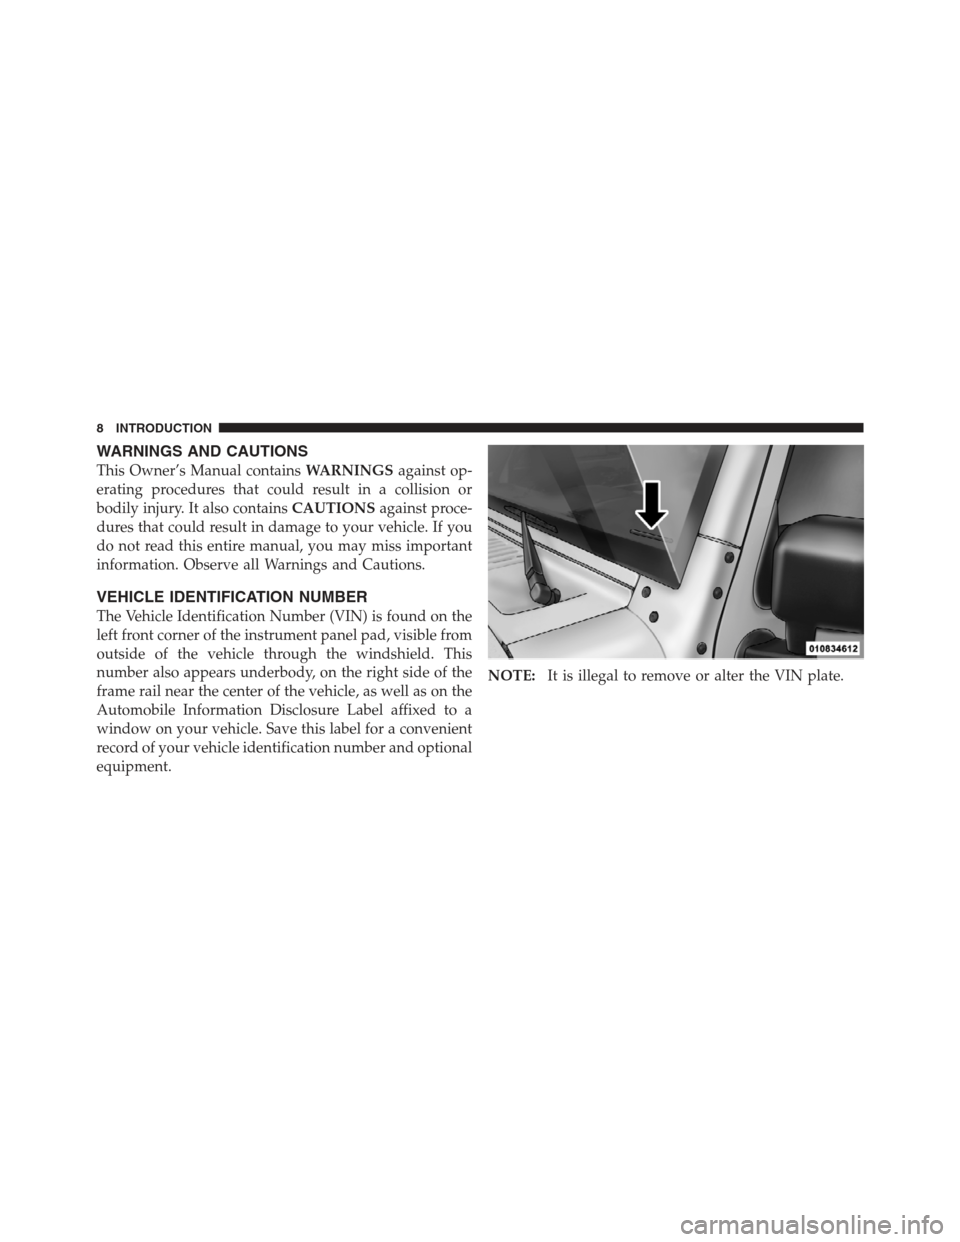 JEEP WRANGLER 2012 JK / 3.G Owners Manual WARNINGS AND CAUTIONS
This Owner’s Manual containsWARNINGSagainst op-
erating procedures that could result in a collision or
bodily injury. It also contains CAUTIONSagainst proce-
dures that could r